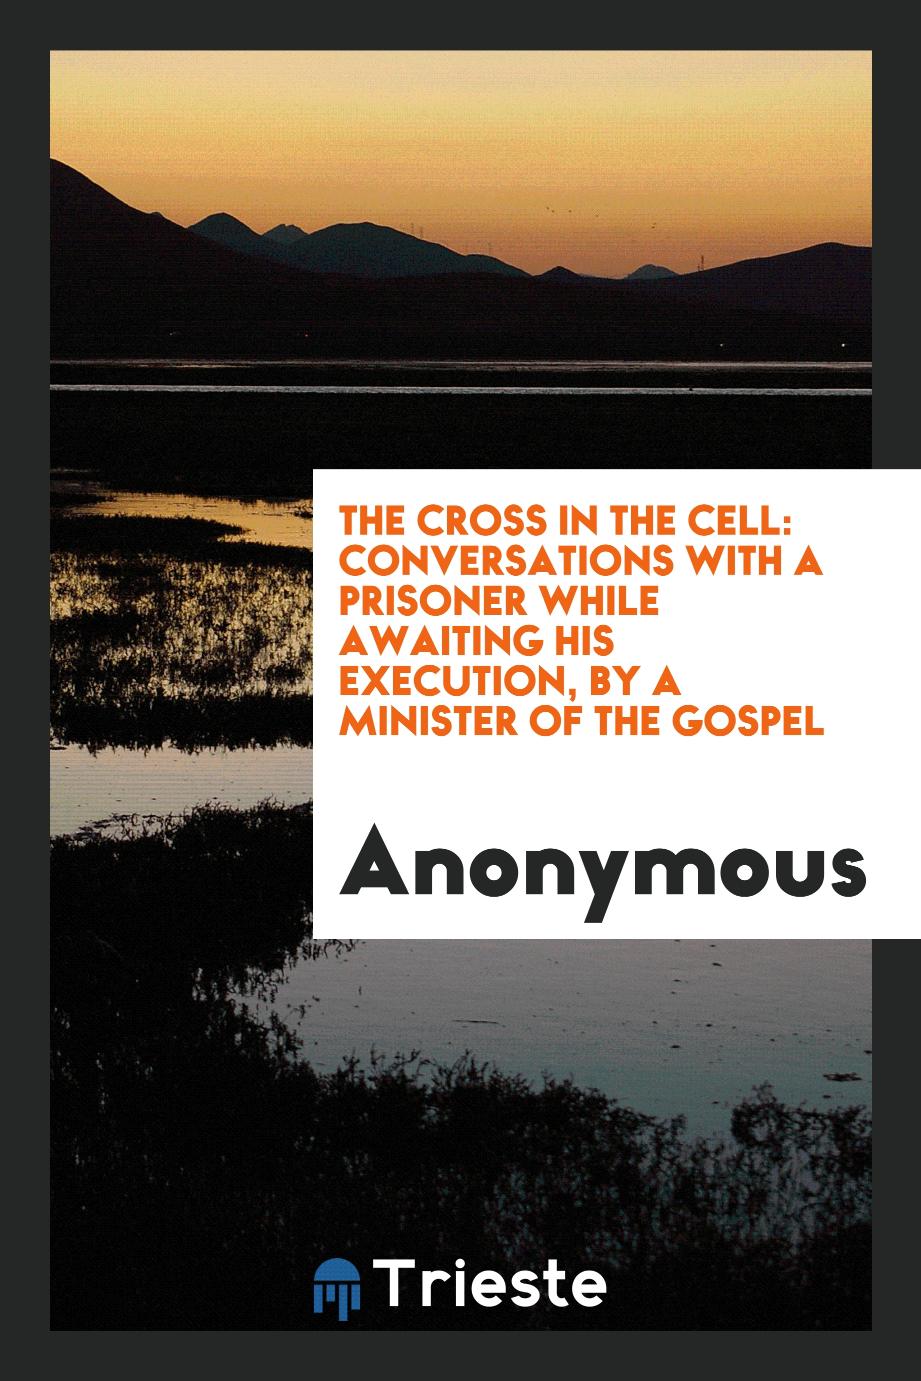 The Cross in the Cell: Conversations with a Prisoner While Awaiting His Execution, by a Minister of the Gospel